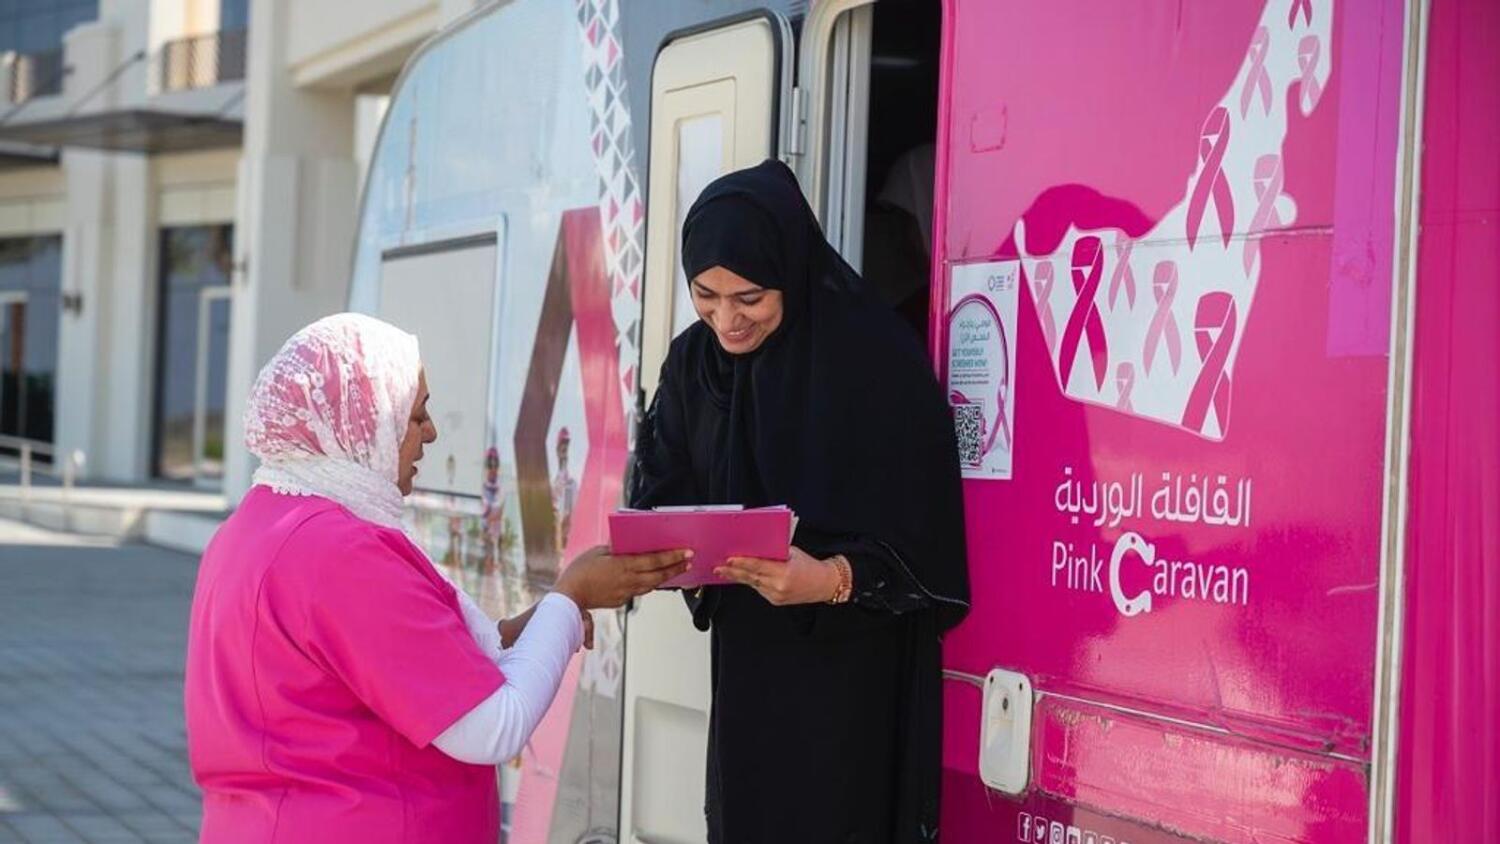 UAE: Pink Caravan invites companies, individuals to join its breast cancer awareness movement